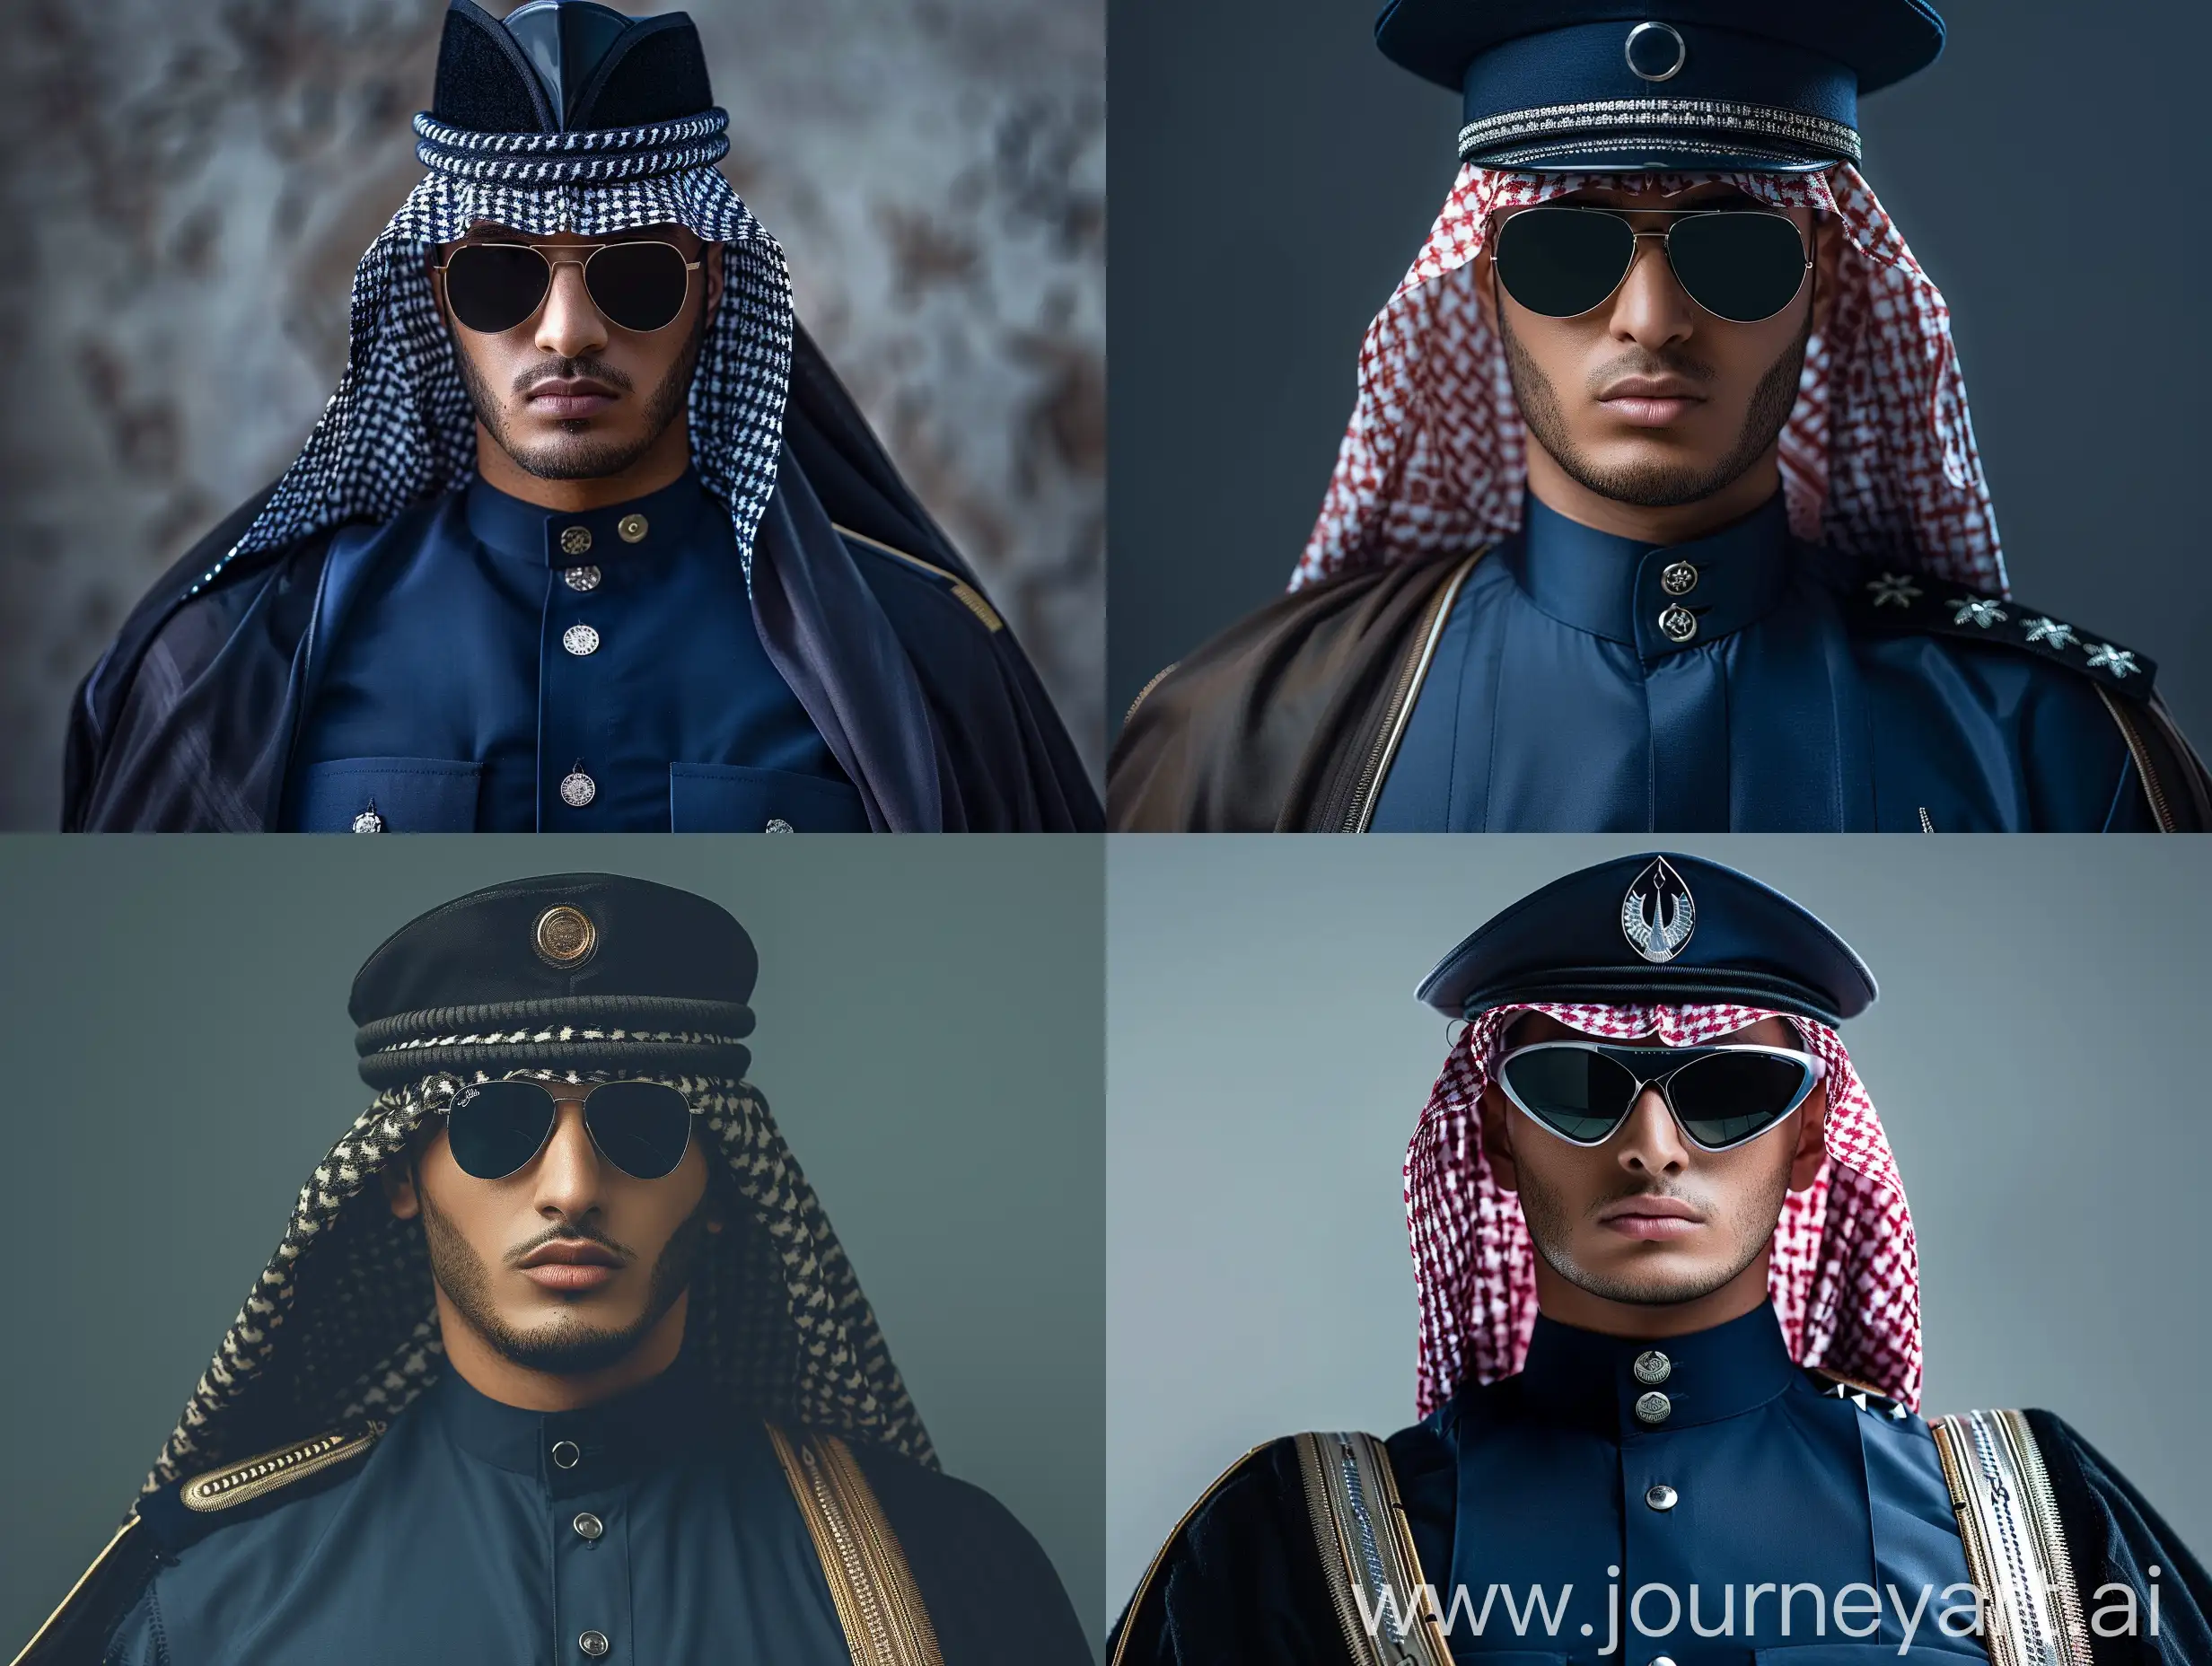 Close up portrait of a young focused Saudi arabian  male general, wearing a modern navy blue ceremonial outfit, wearing a military peaked cap hat with traditional Saudi headscarf, wearing military sunglasses, also wearing a military cape